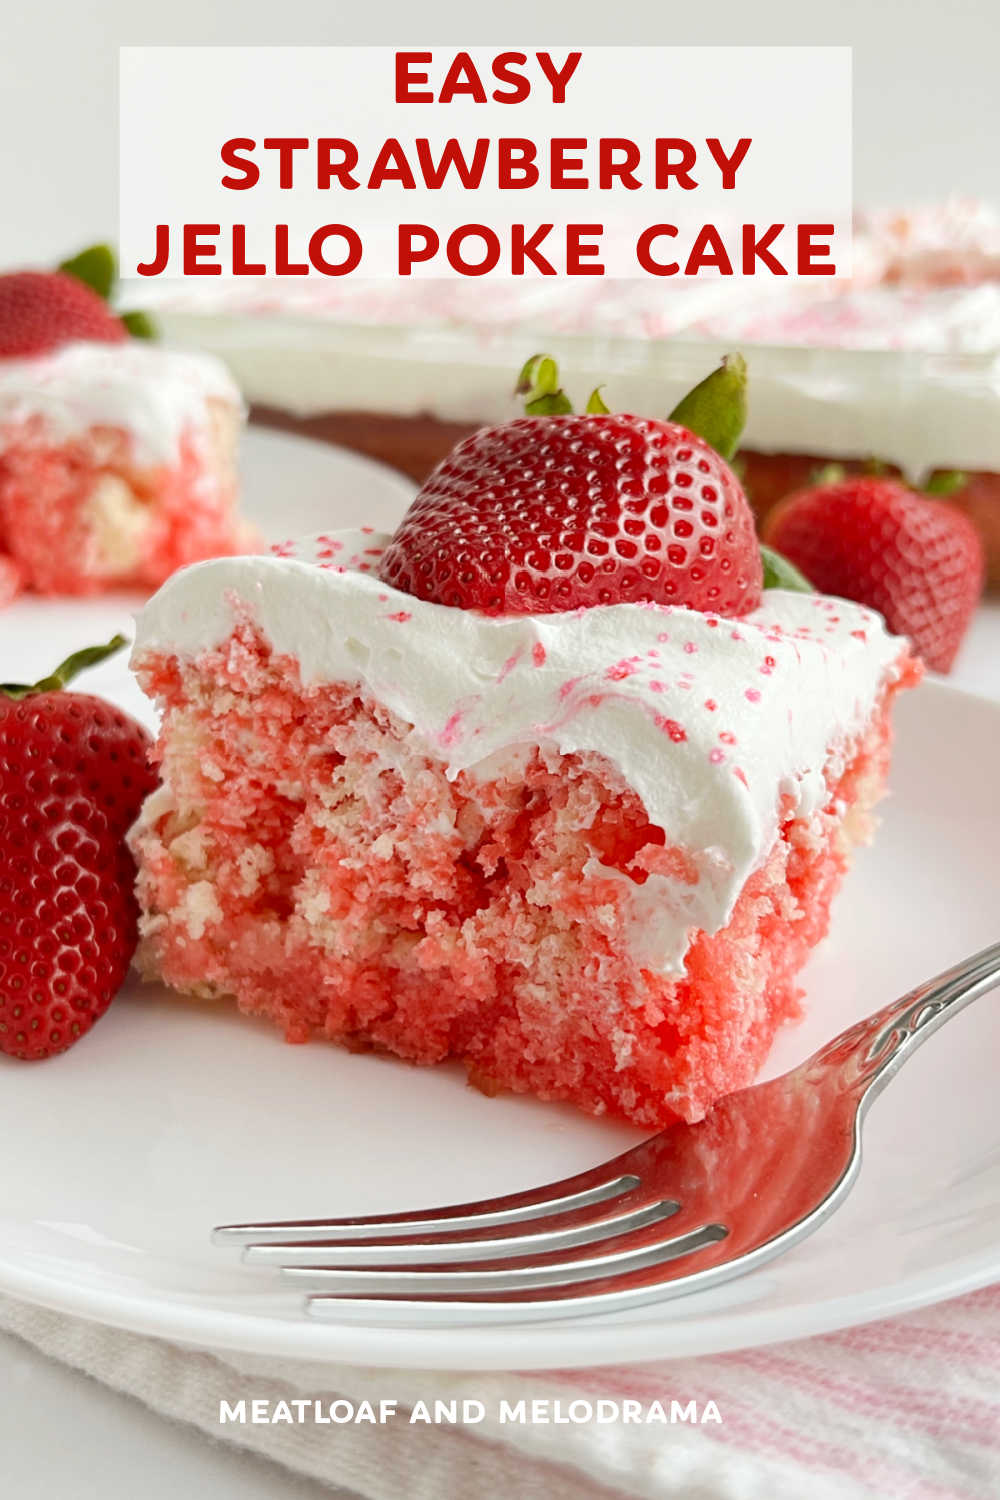 Strawberry Jello Poke Cake recipe is an easy dessert made with white cake mix, strawberry Jello and Cool Whip whipped topping for frosting. Top this delicious cake with fresh strawberries for a simple spring and summer dessert! via @meamel